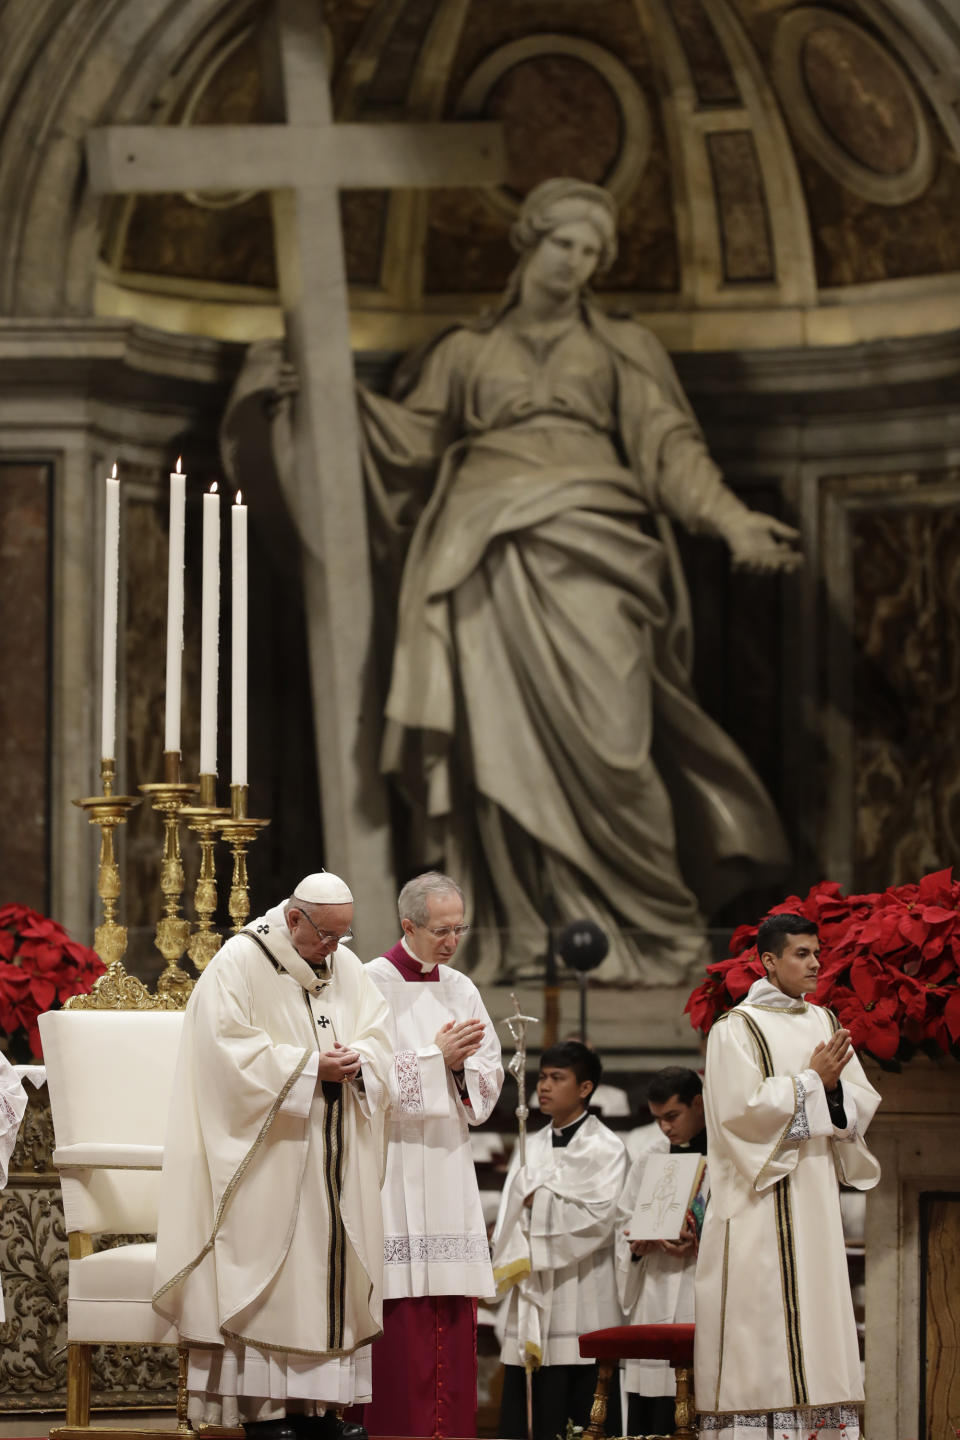 Pope Francis, left, celebrates the Christmas Eve Mass in St. Peter's Basilica at the Vatican, Monday, Dec. 24, 2018. (AP Photo/Alessandra Tarantino)